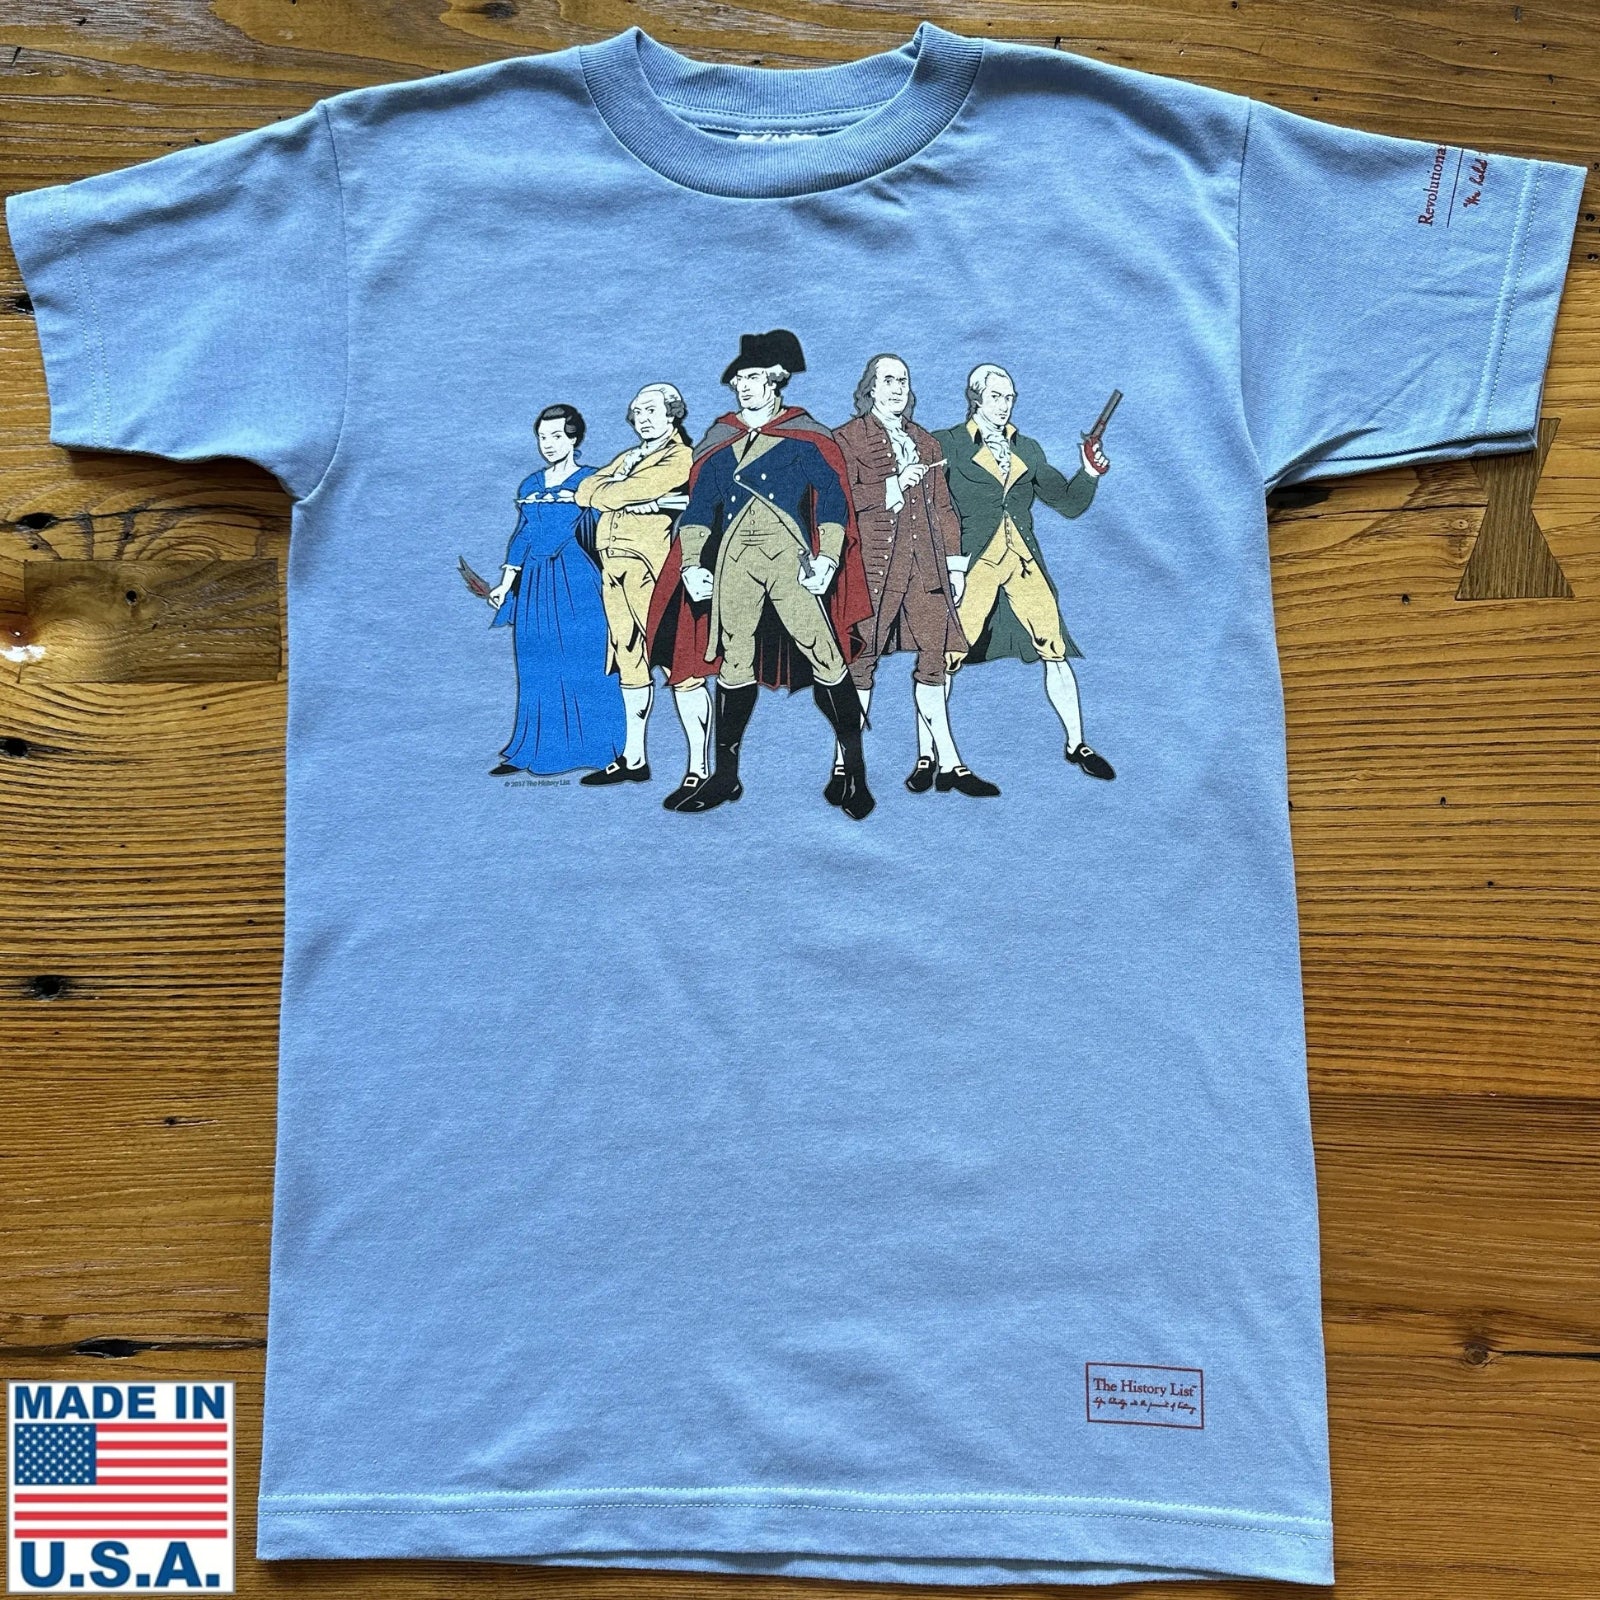 "Revolutionary Superheroes" with George Washington T-Shirt in Carolina blue from The History List store